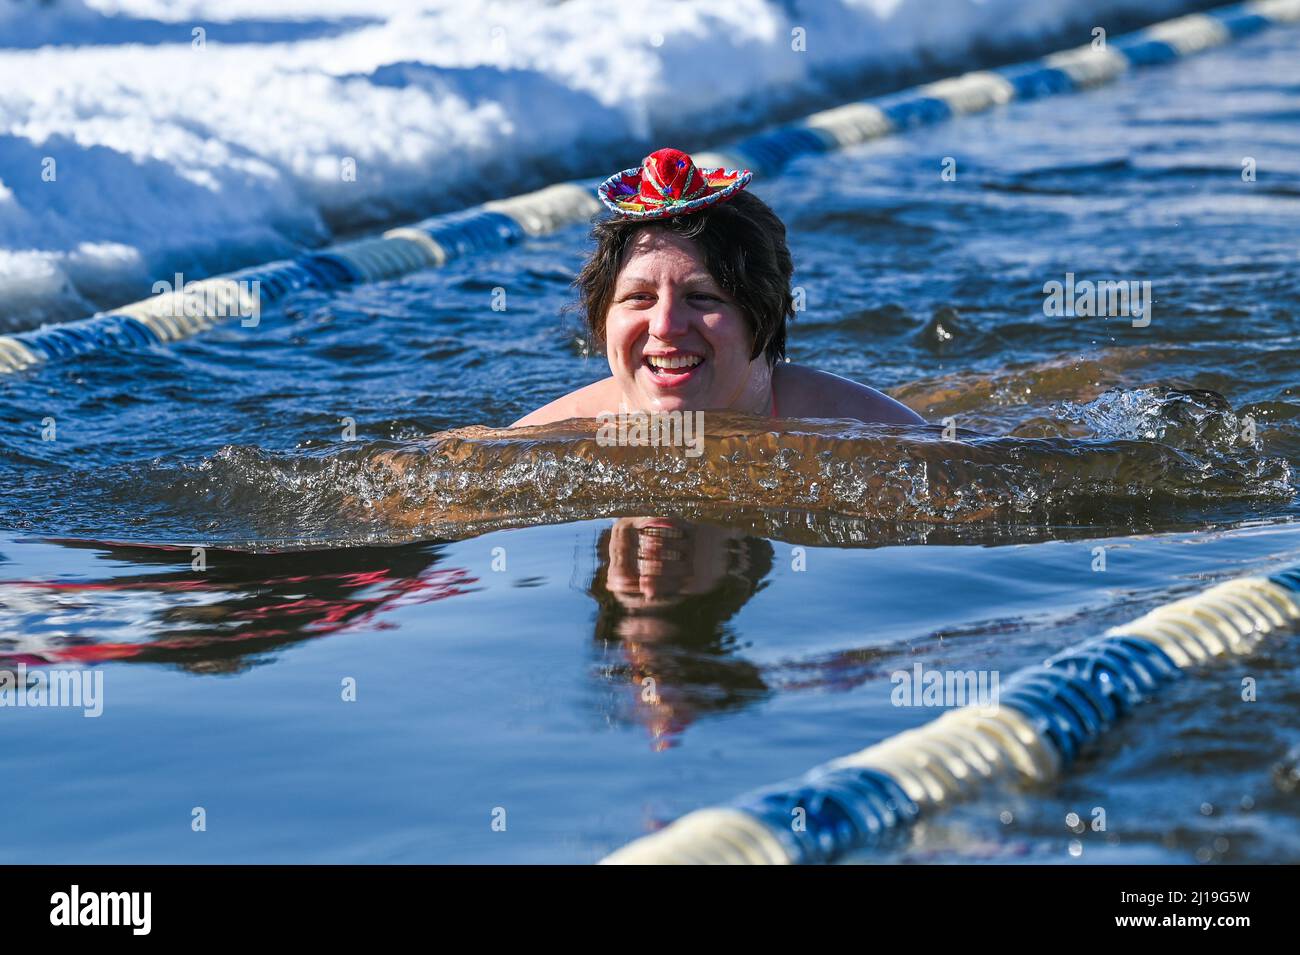 Cold water swimmers swim in the icy water of Lake Memphremagog near the Canadian board in Newport, VT, in March. Stock Photo